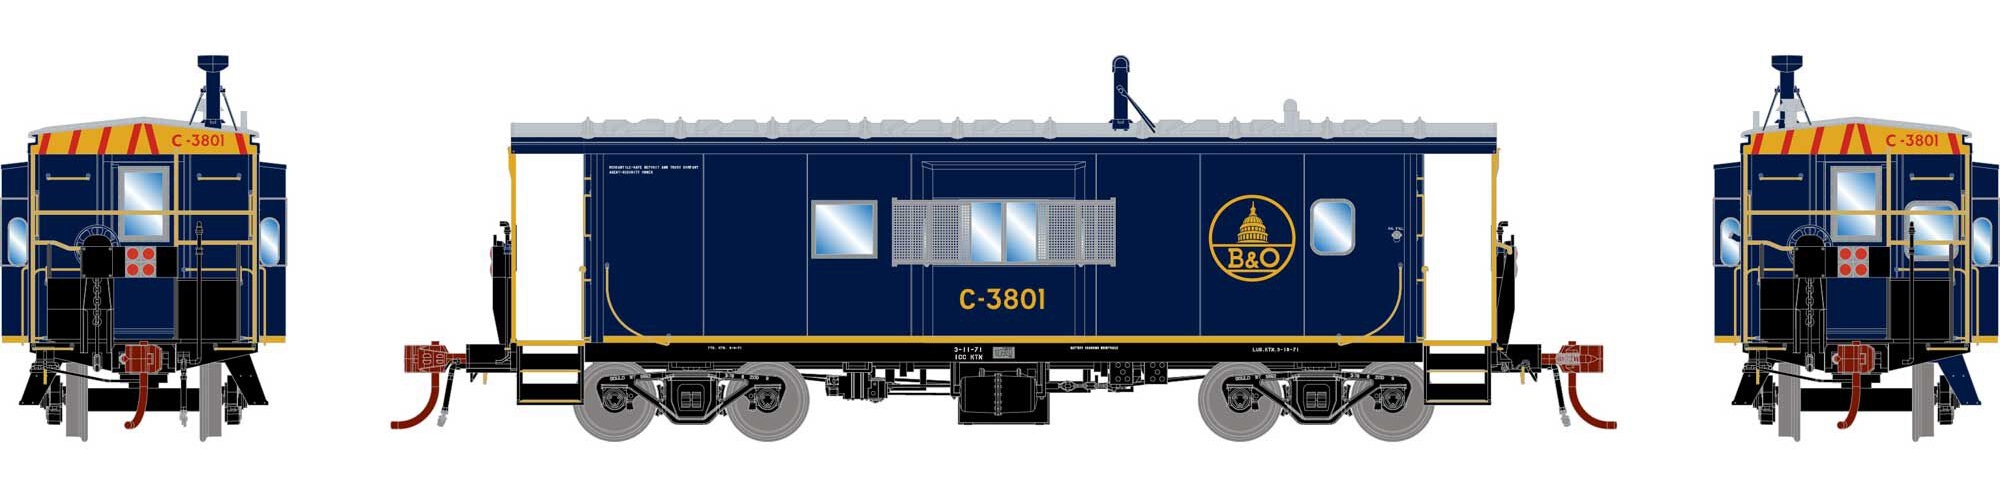 Athearn Genesis HO ATHG78546 DCC/NCE Equipped C-26 ICC Caboose with Lights B&O #C-3801